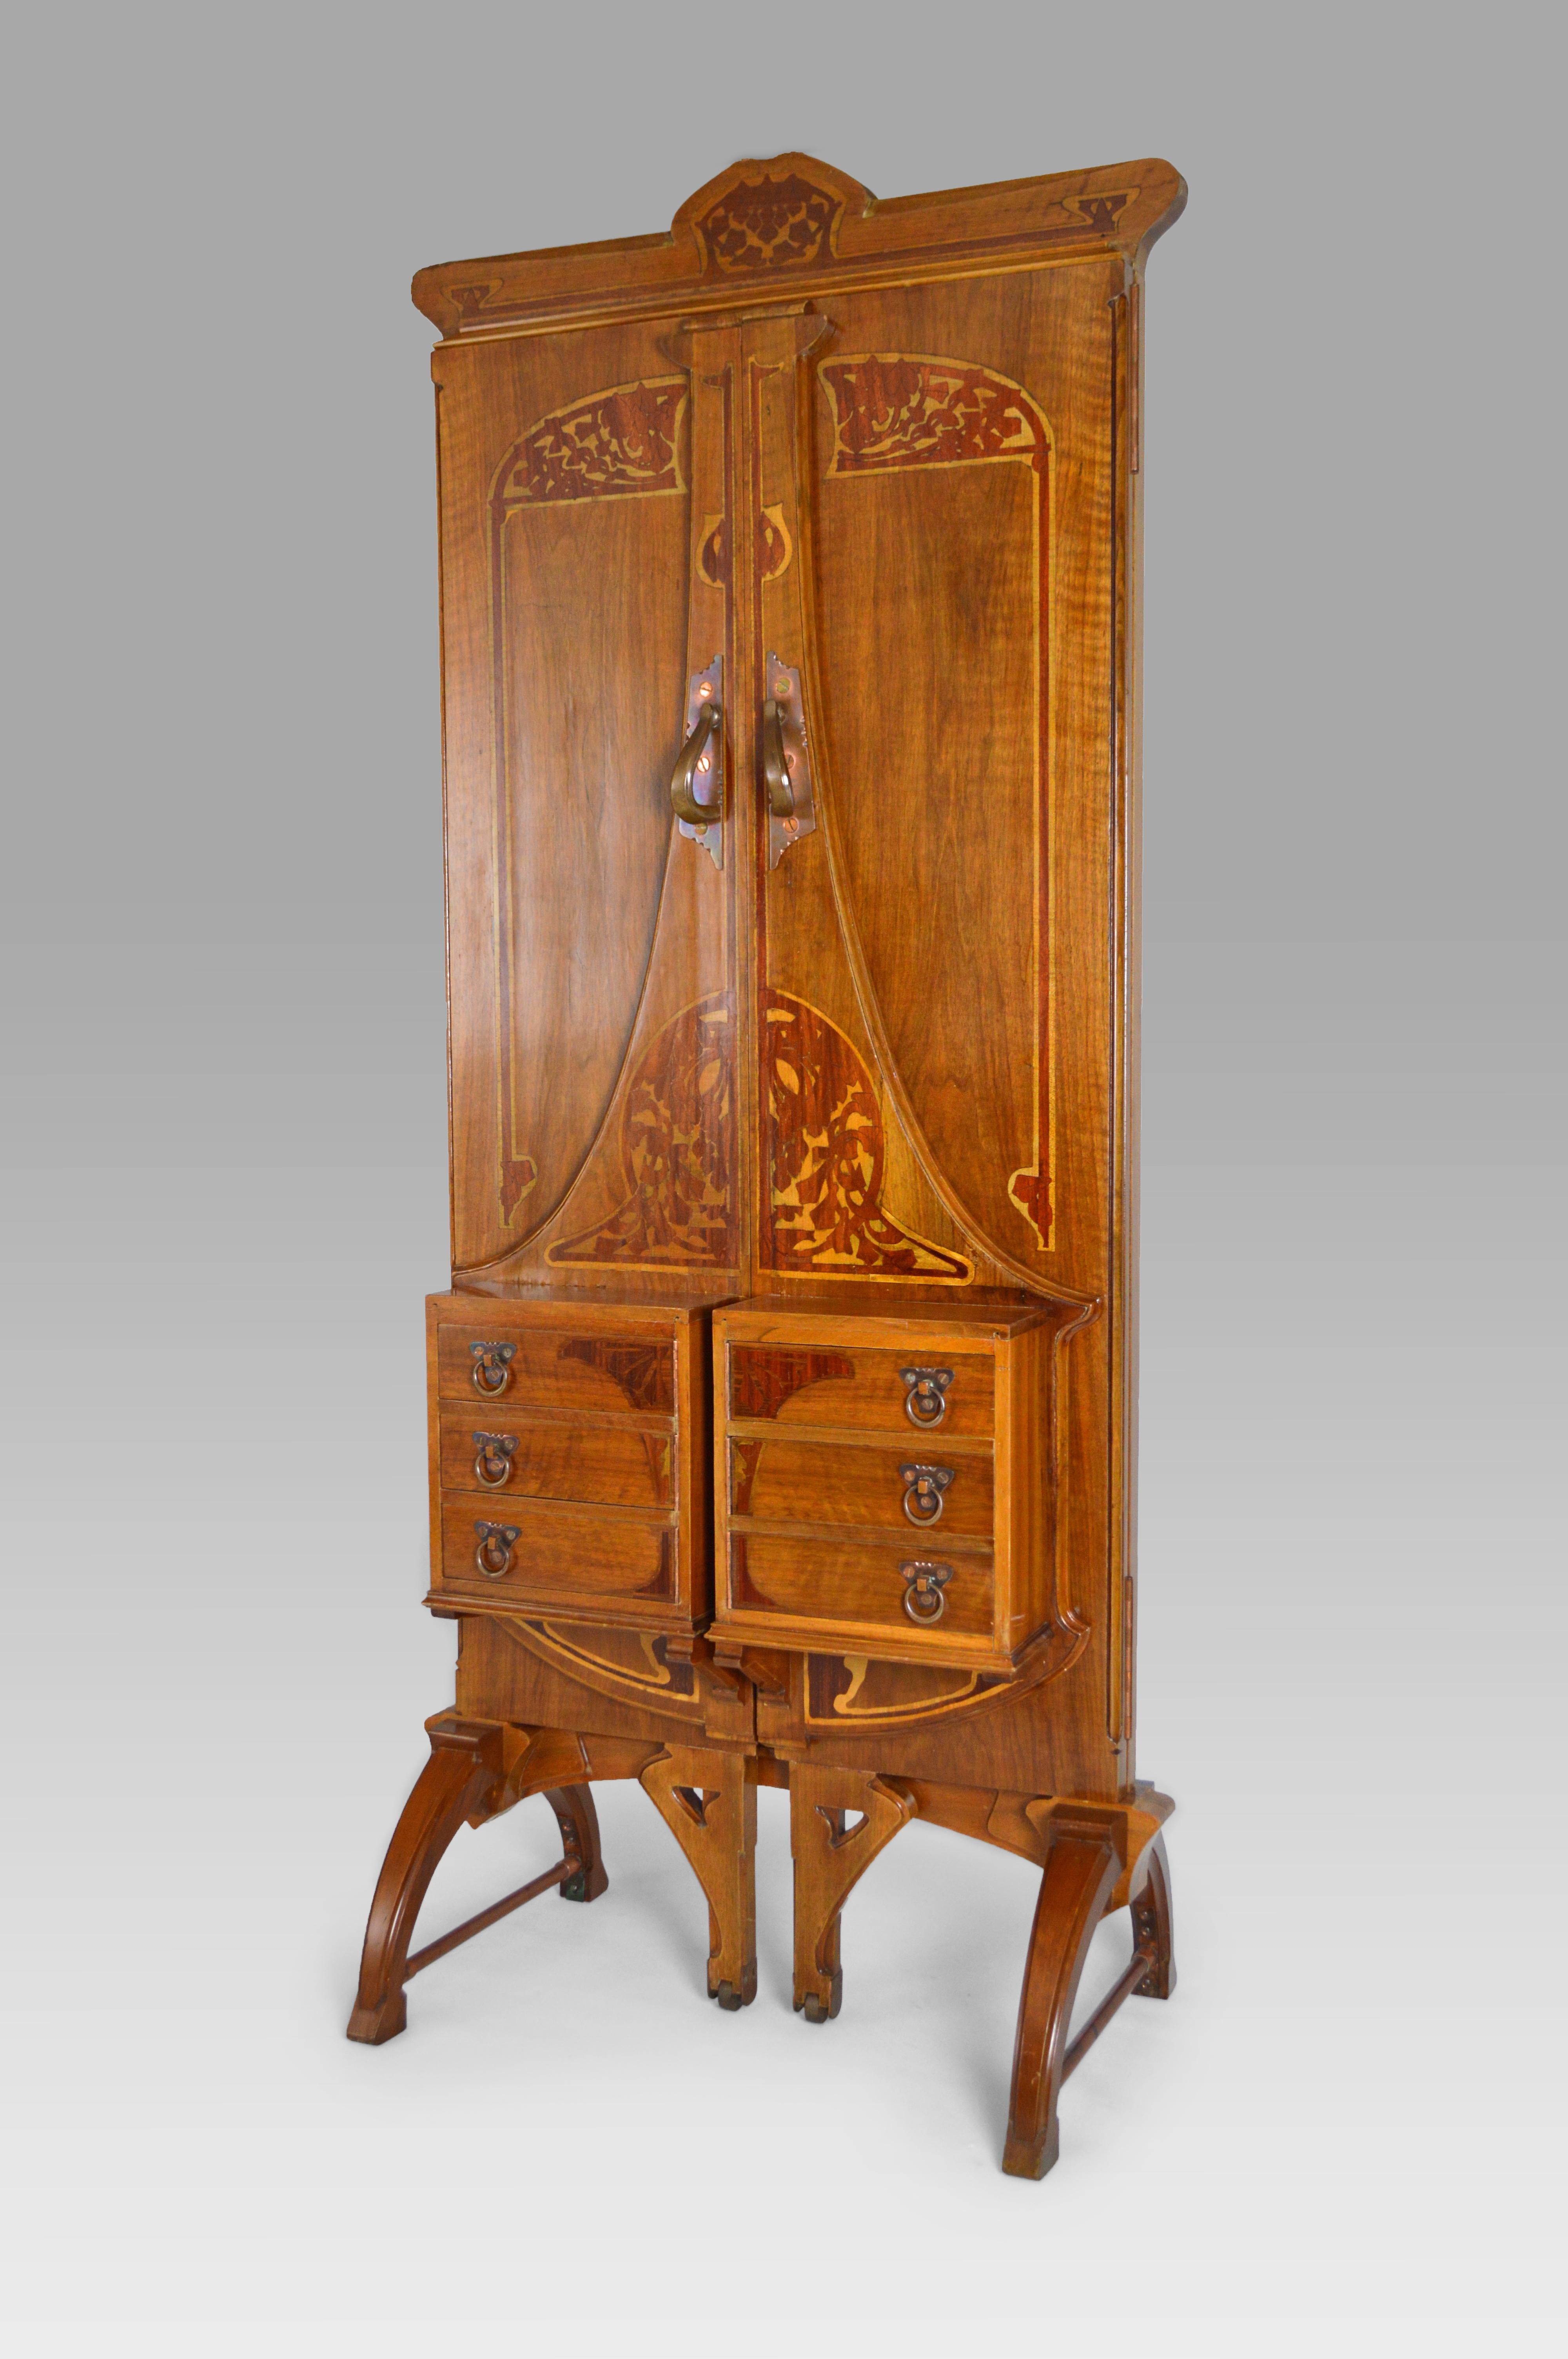 Early 20th Century French Art Nouveau Cheval Mirror 5-Panel Screen / Vanity Dressing Table, 1901 For Sale